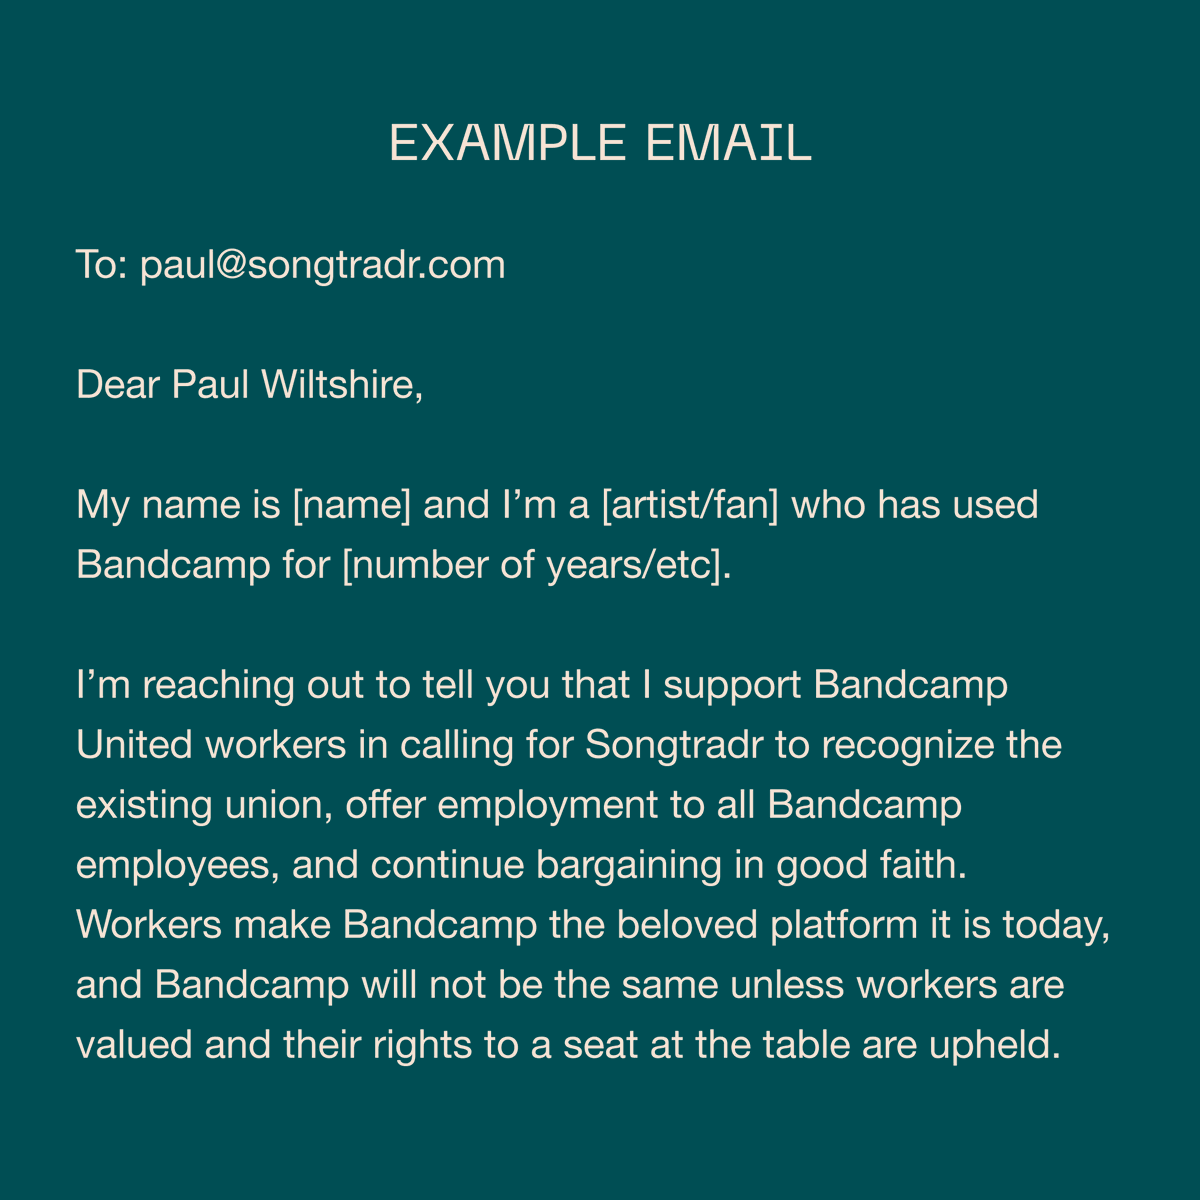 Songtradr dropped a new press statement but still hasn’t recognized our union. This Bandcamp United Friday, keep buying music & help us fight for our union by emailing Paul, CEO of Songtradr. Please keep the emails respectful! Post a screenshot & tag us on social media.